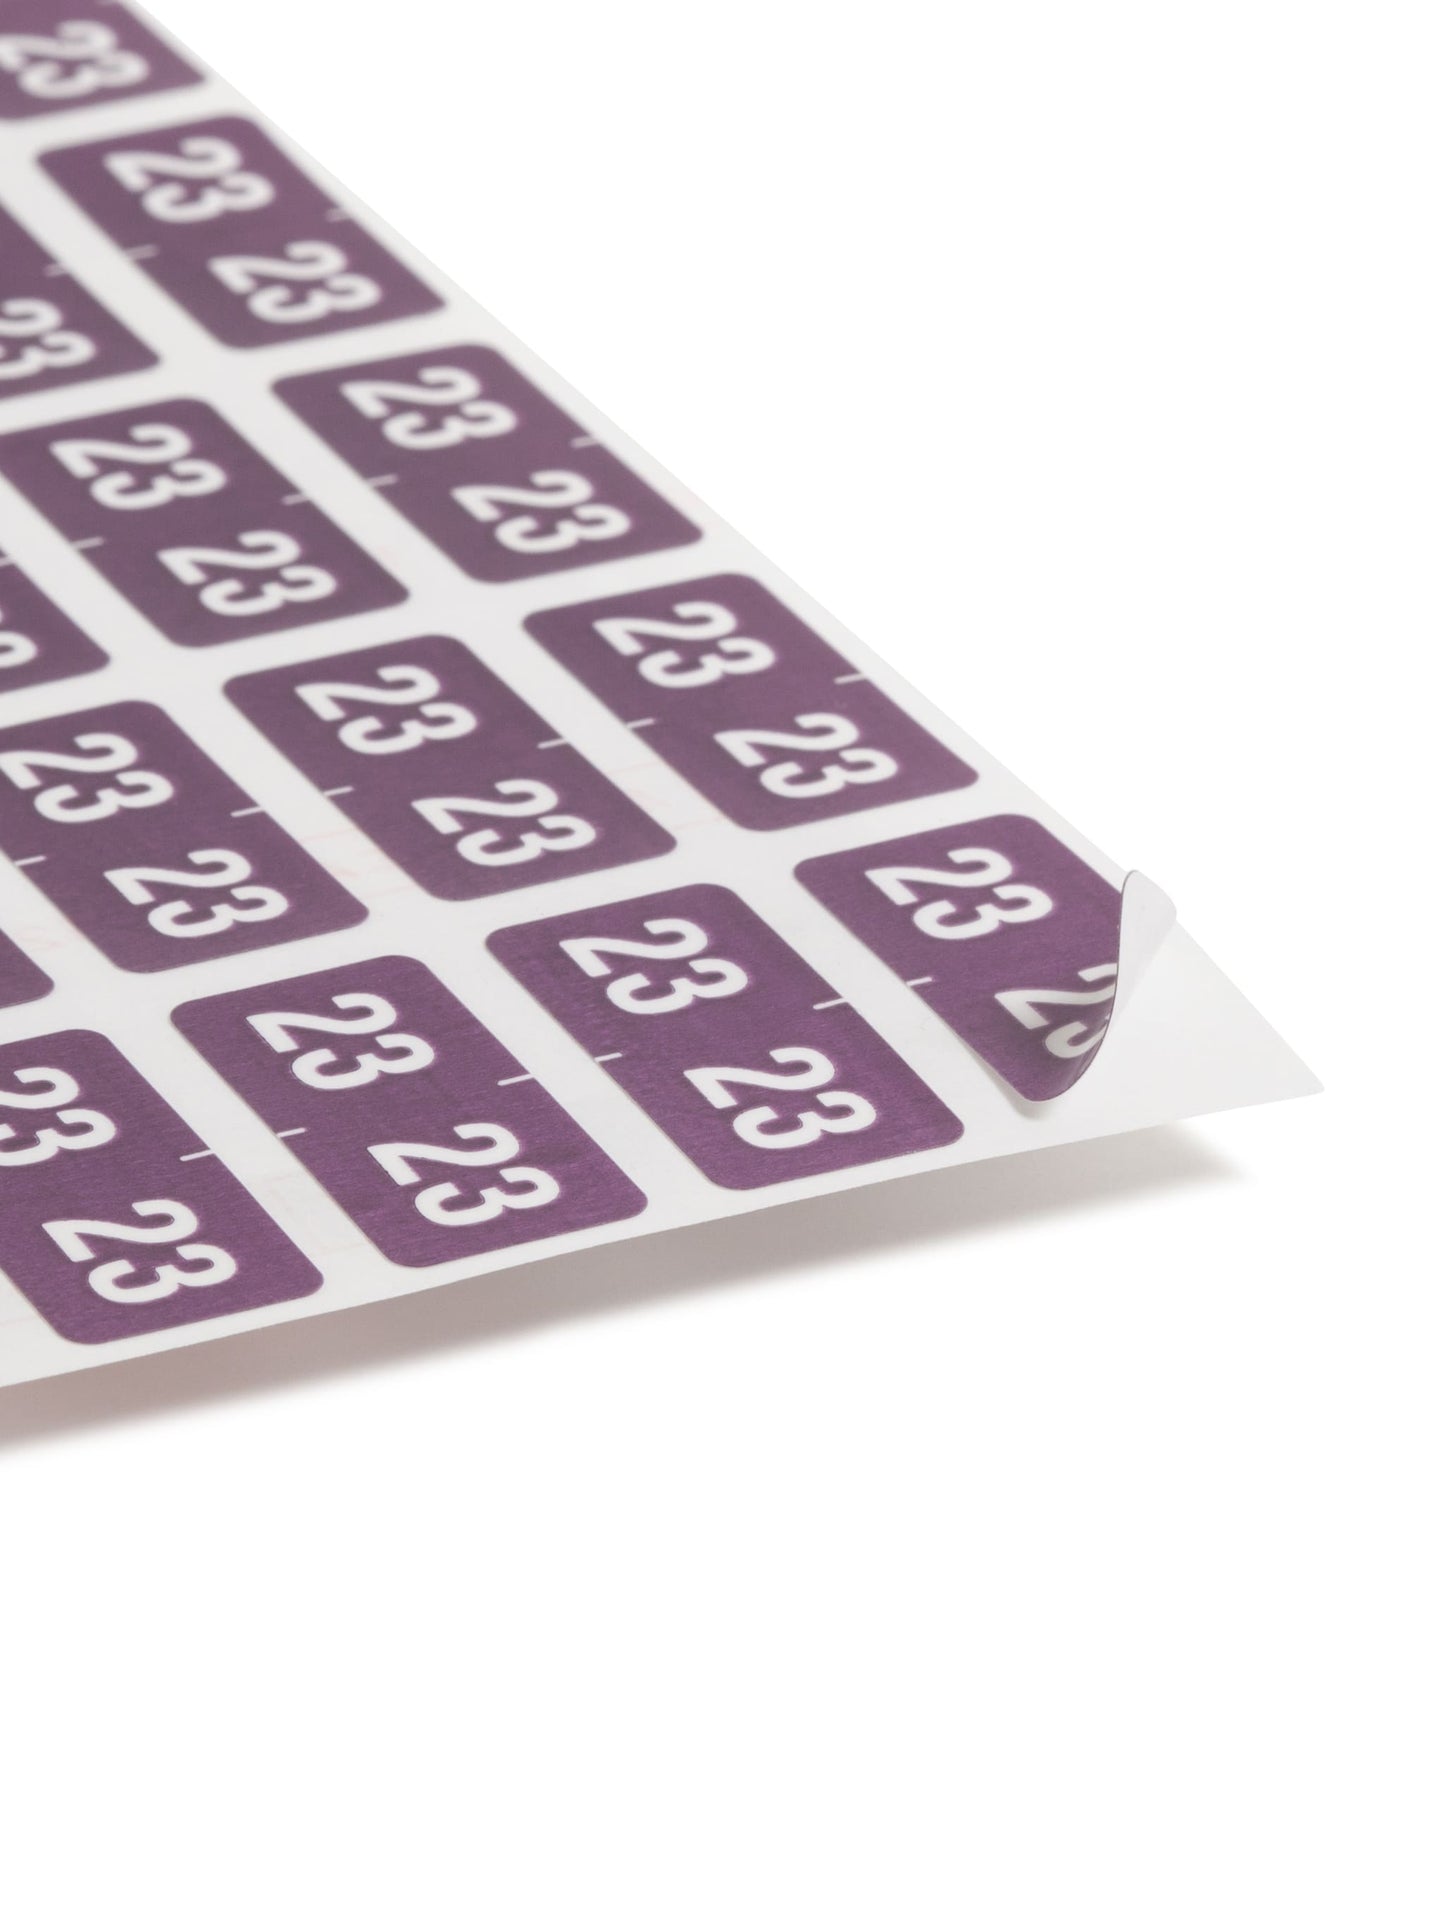 ETS Color-Coded Year Labels - Sheets, Purple Color, 1" X 1/2" Size, Set of 1, 086486679237